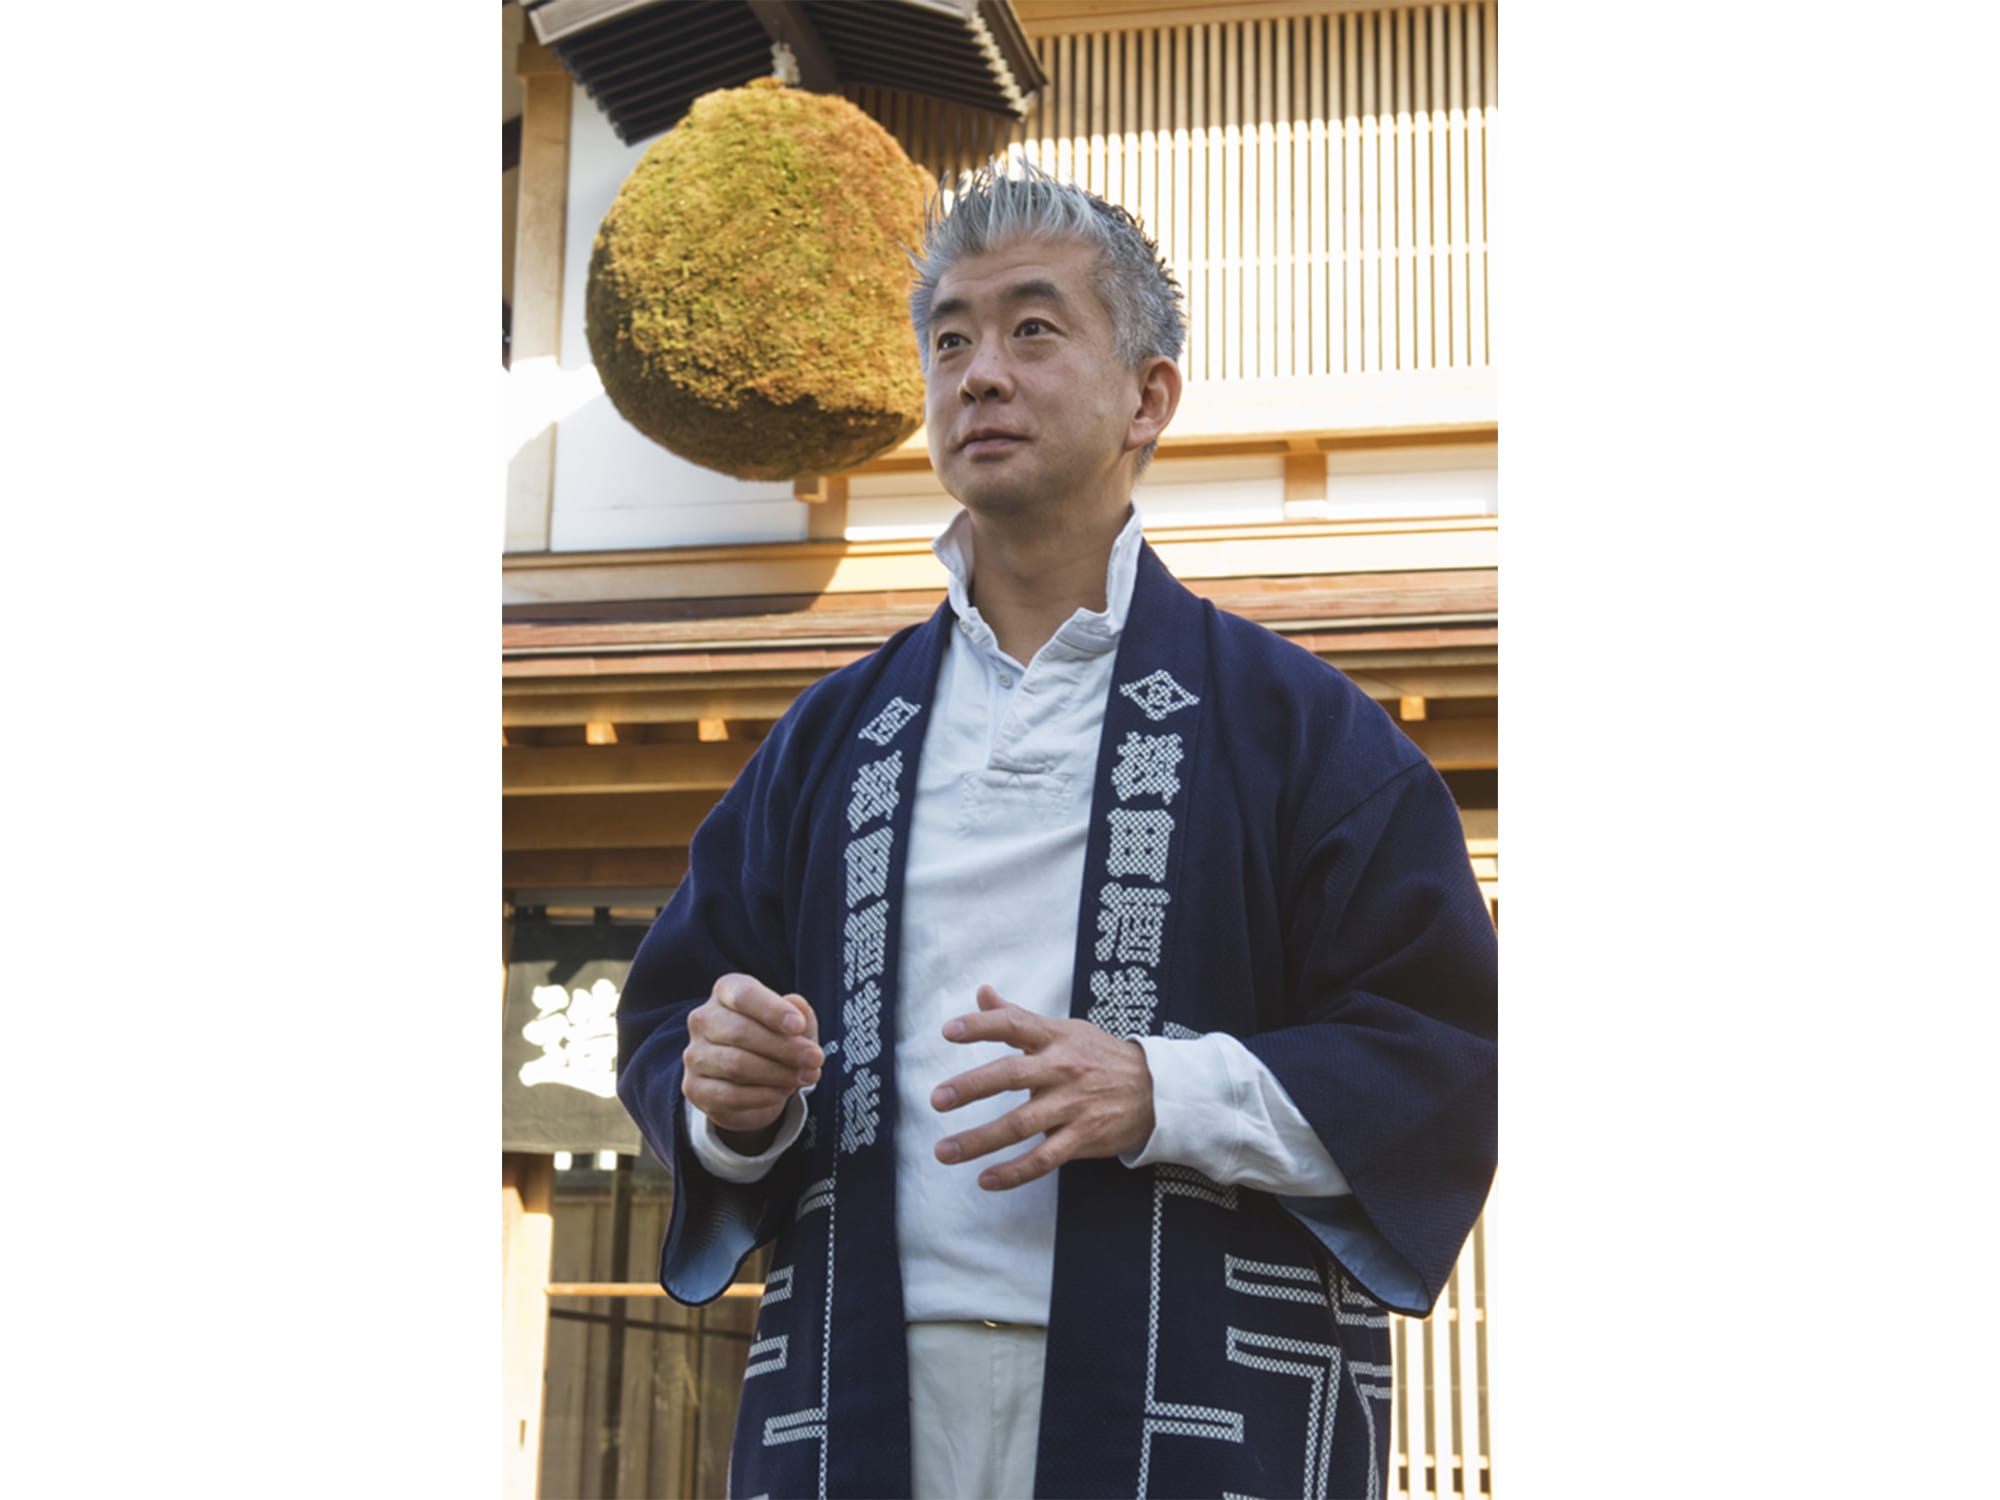 Ryuichiro Masuda, Masudashuzo’s fifth generation mentions that Bunka wo matou (to be wrapped in culture) is important for both sake brewing and town planning.